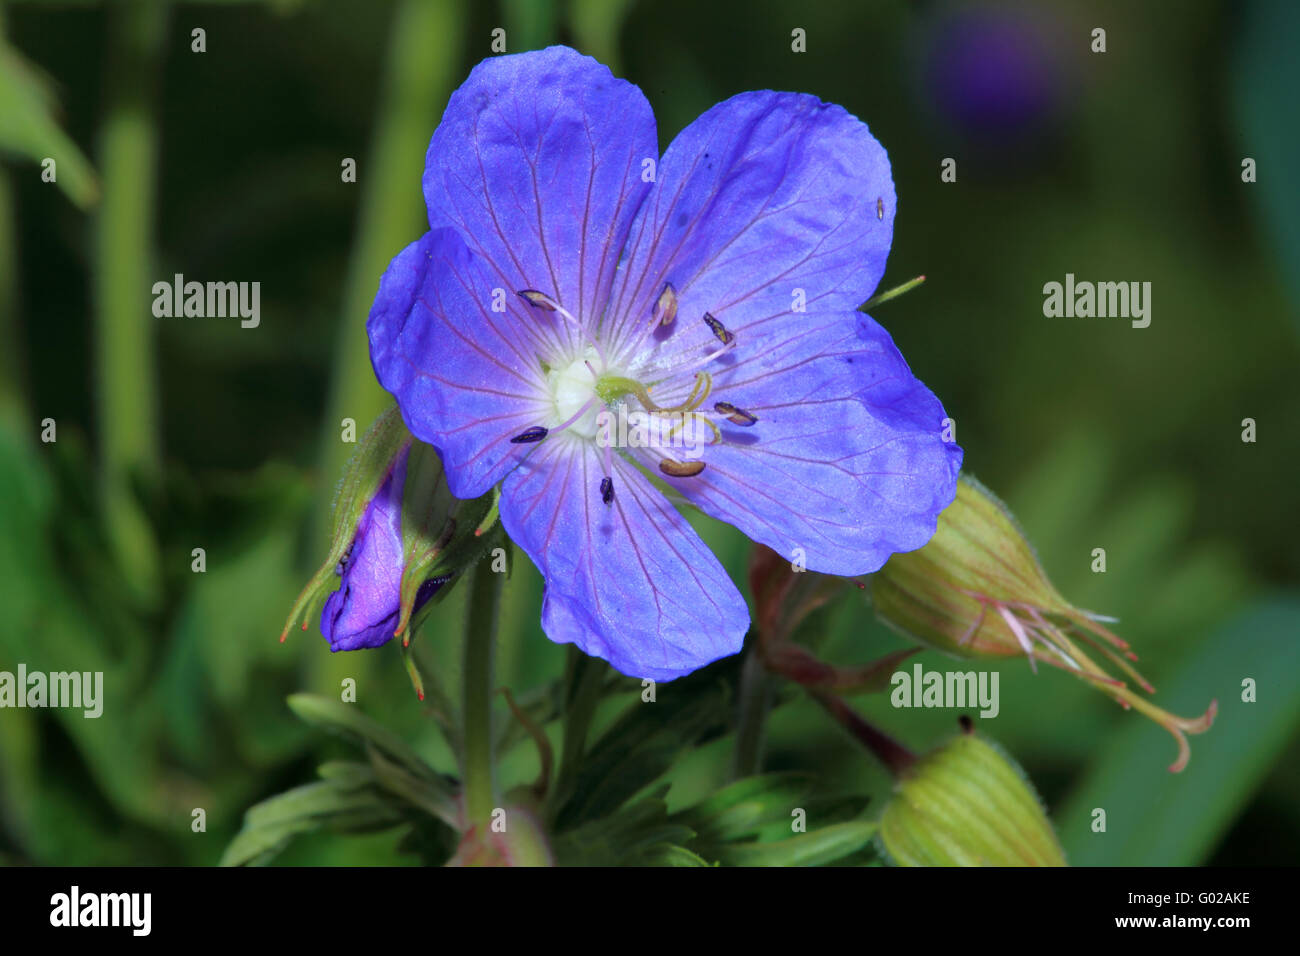 Macro images of the blossom from a Cranesbill Stock Photo